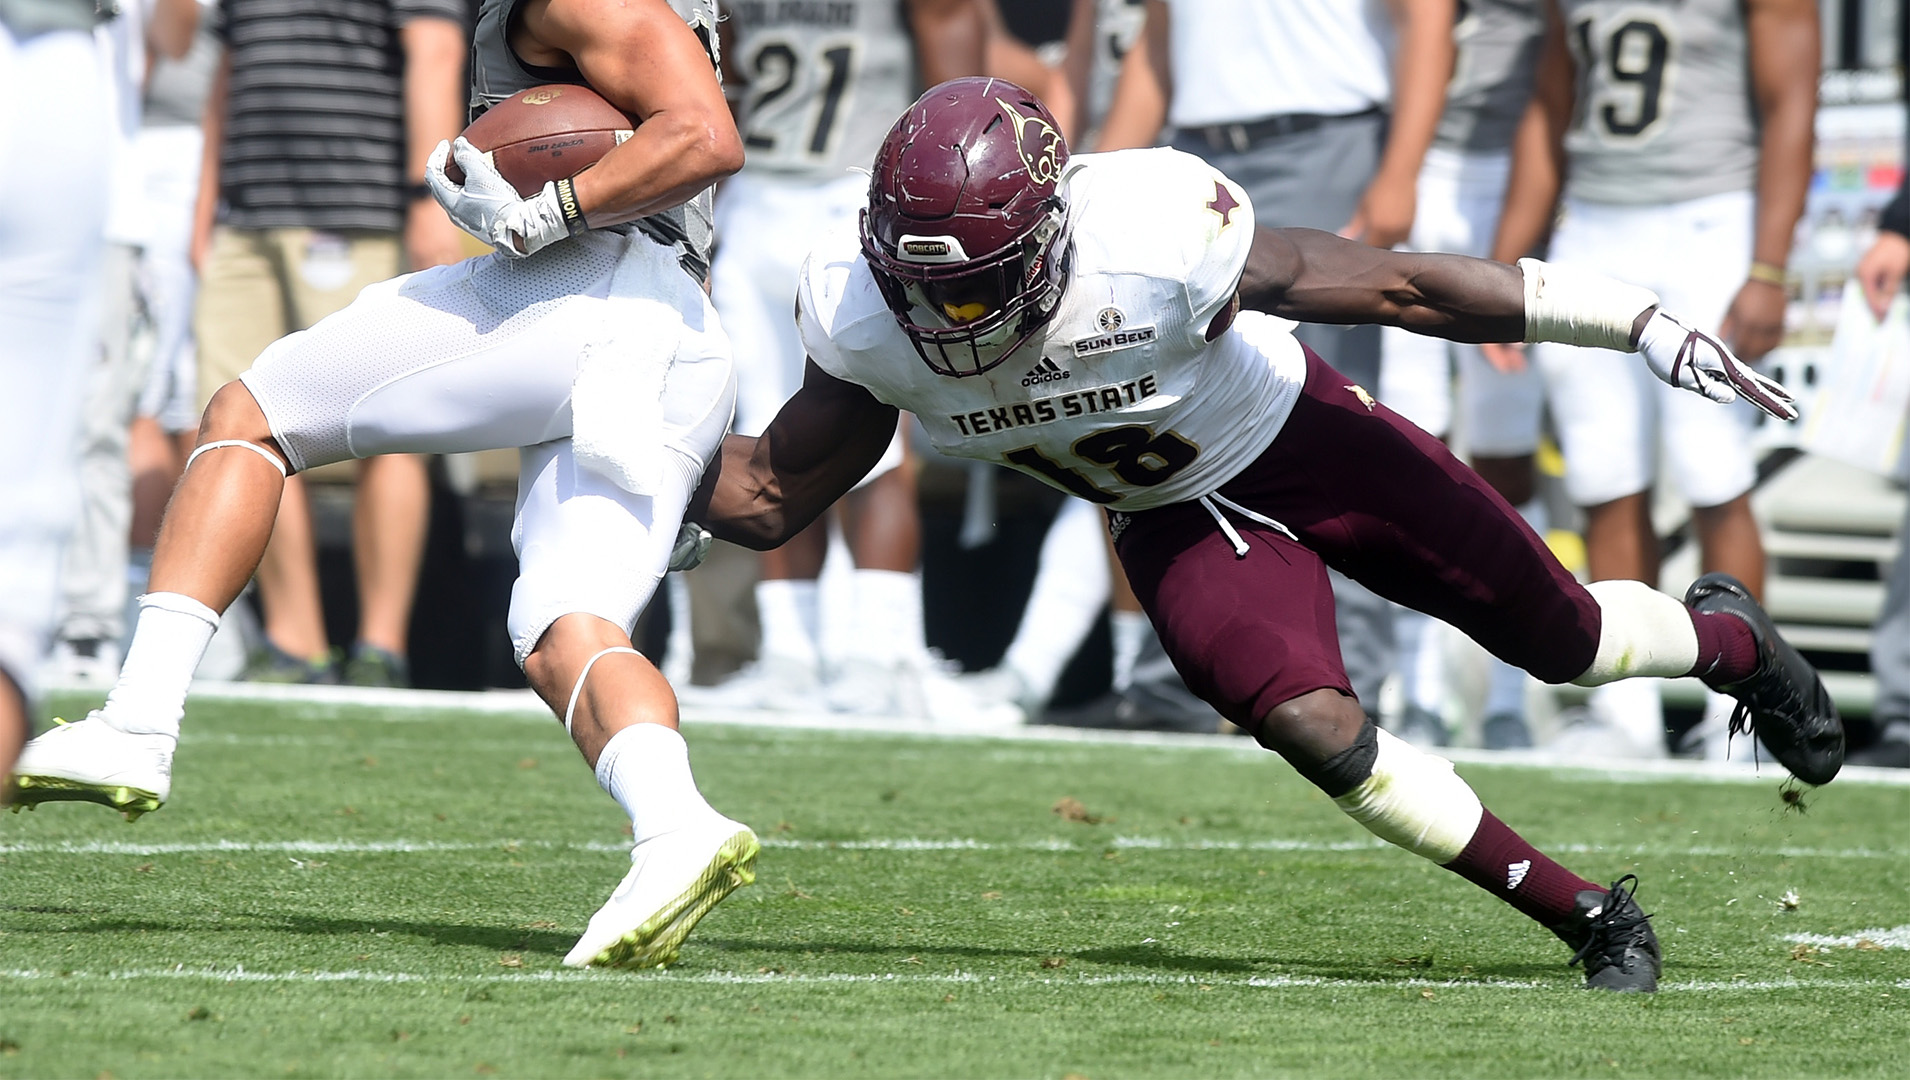 Texas State University's Linebacker Frankie Griffin dives for a tackle